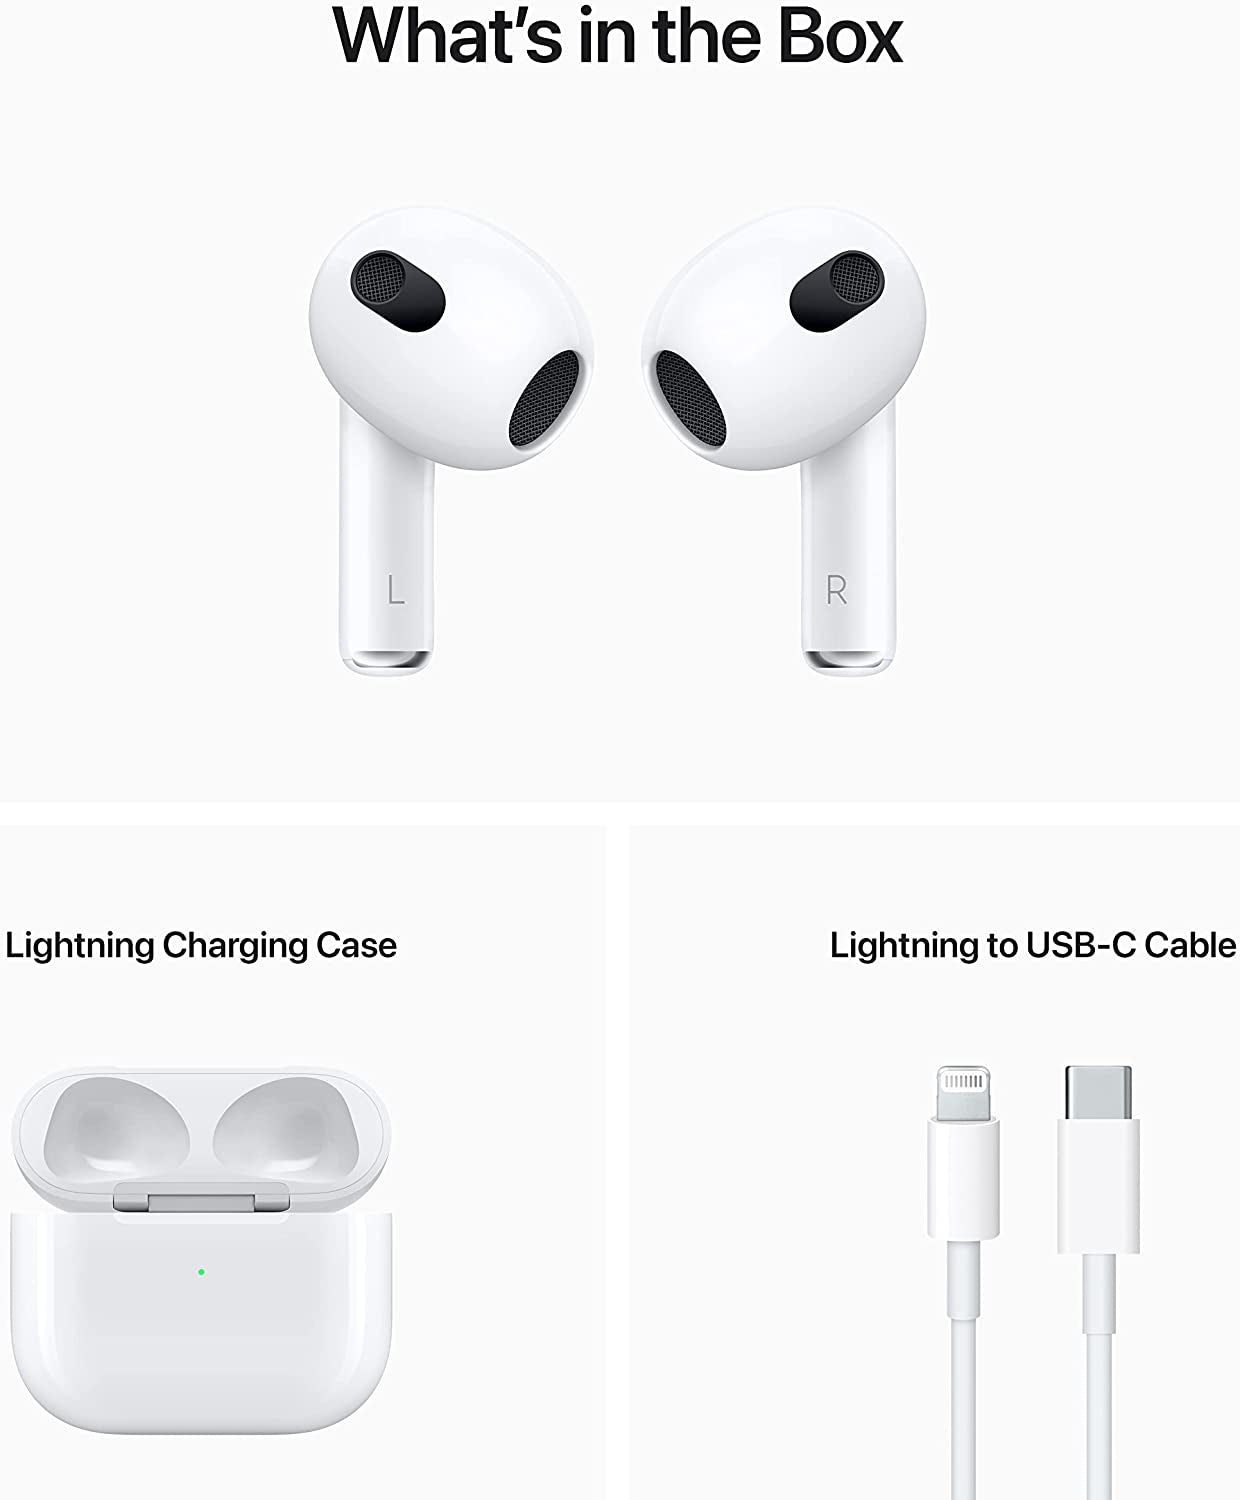 Airpods (3Rd Generation) Wireless Ear Buds, Bluetooth Headphones, Personalized Spatial Audio, Sweat and Water Resistant, Lightning Charging Case Included, up to 30 Hours of Battery Life